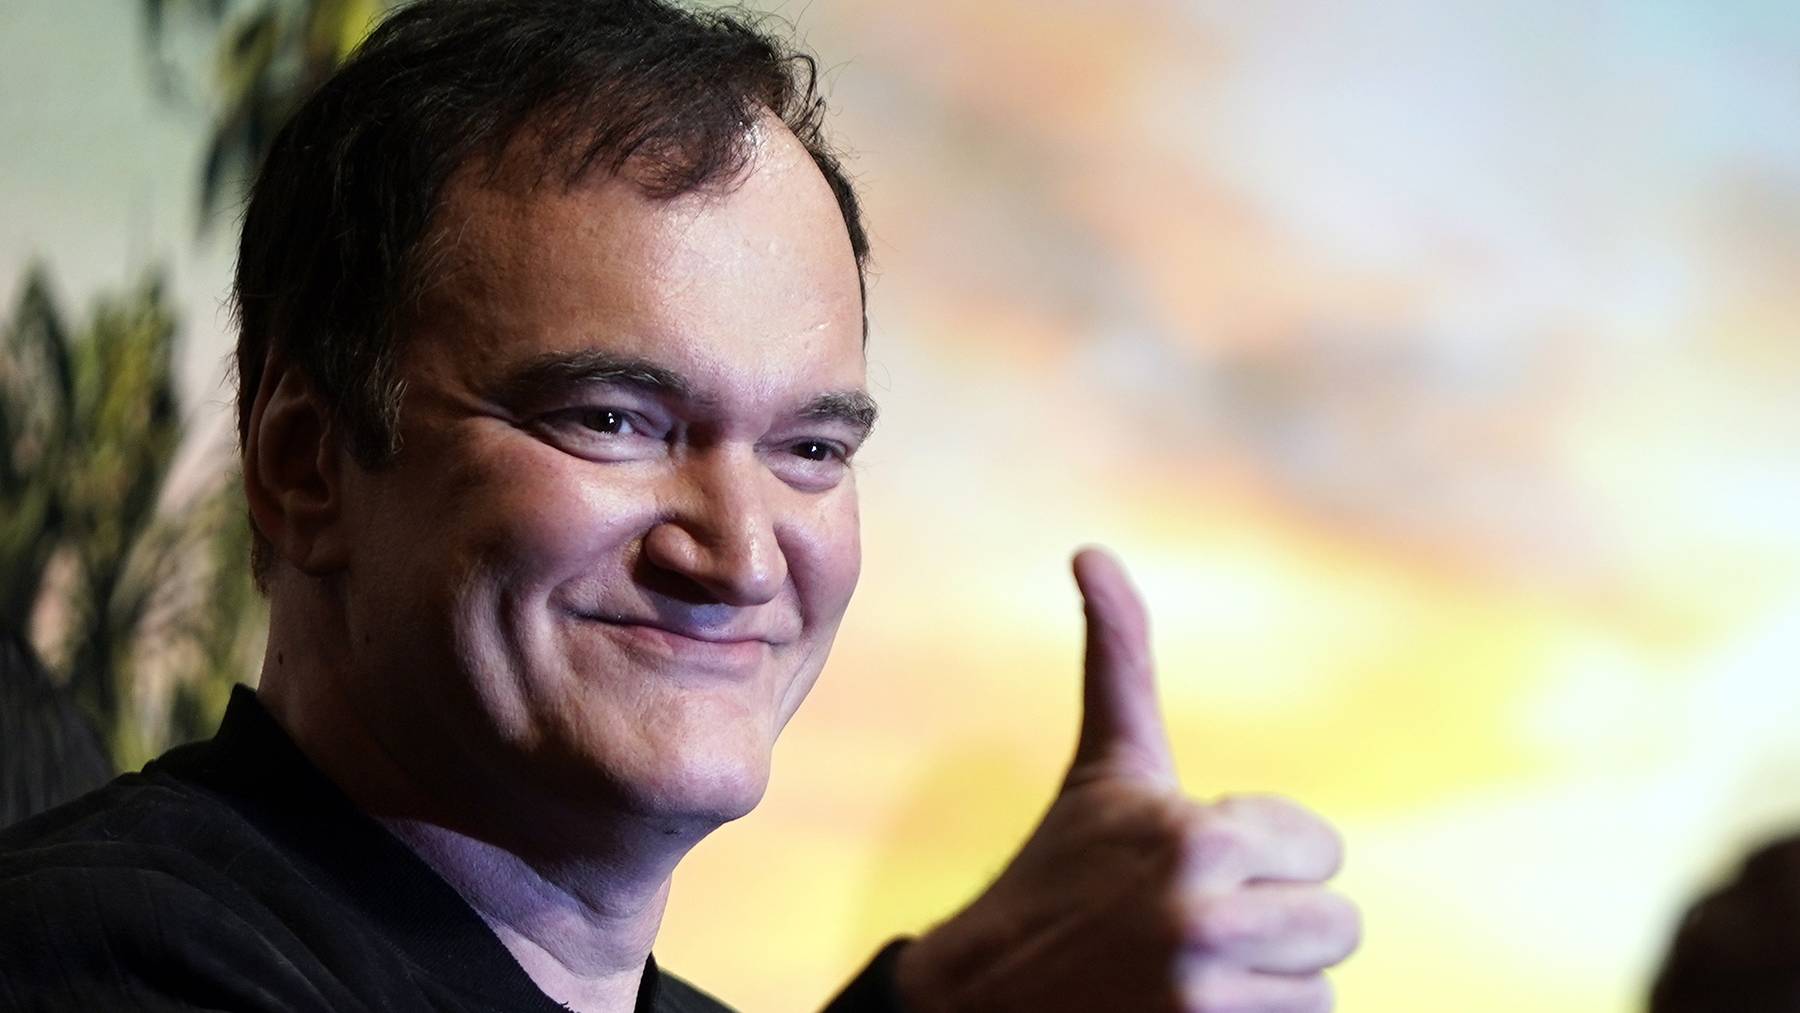 US director Quentin Tarantino gestures during a press conference promoting his movie ‹Once Upon a Time... in Hollywood› in Tokyo, Japan, 26 August 2019. The movie opens in Japanese cinemas on 30 August.